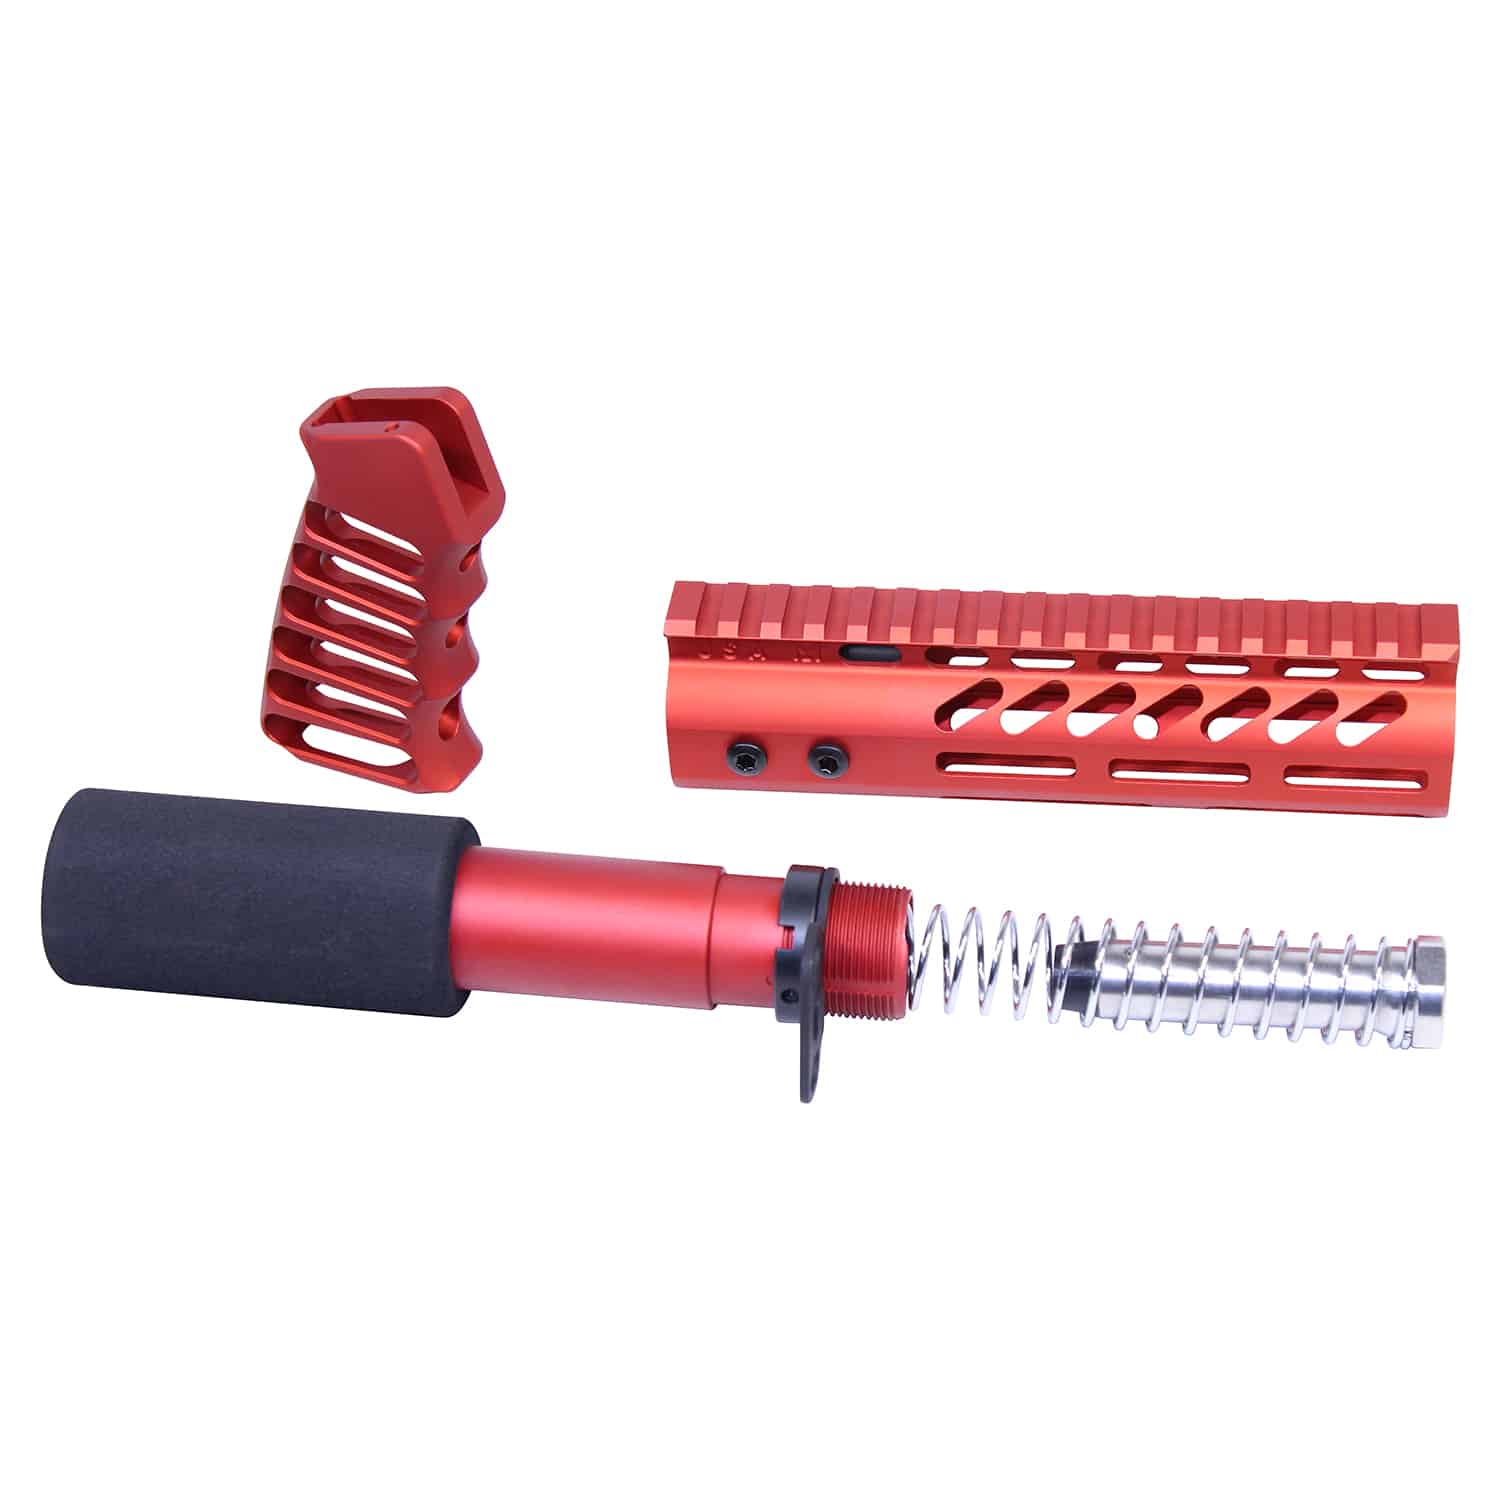 AR-15 Pistol Furniture Set in Anodized Red